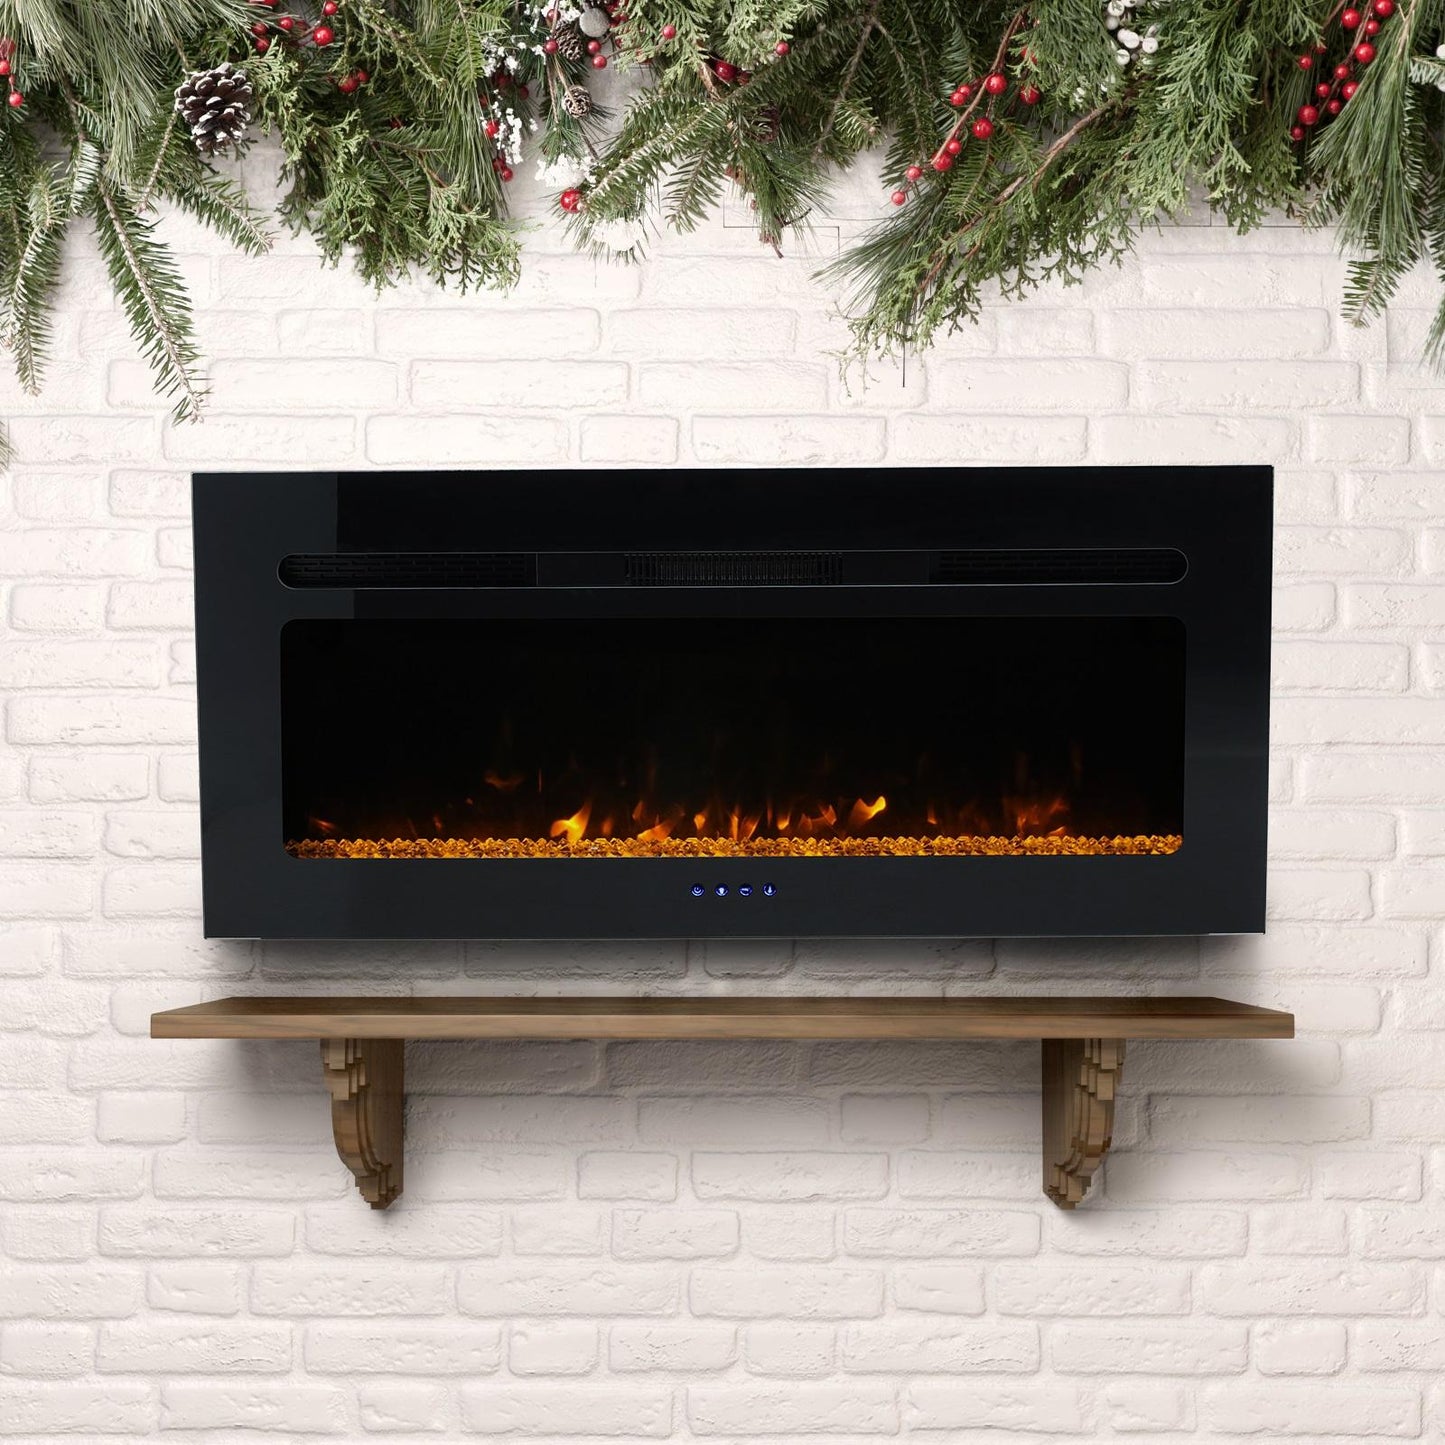 Sophia & William 40 inches Electric Fireplace Recessed & Wall Mounted Heater